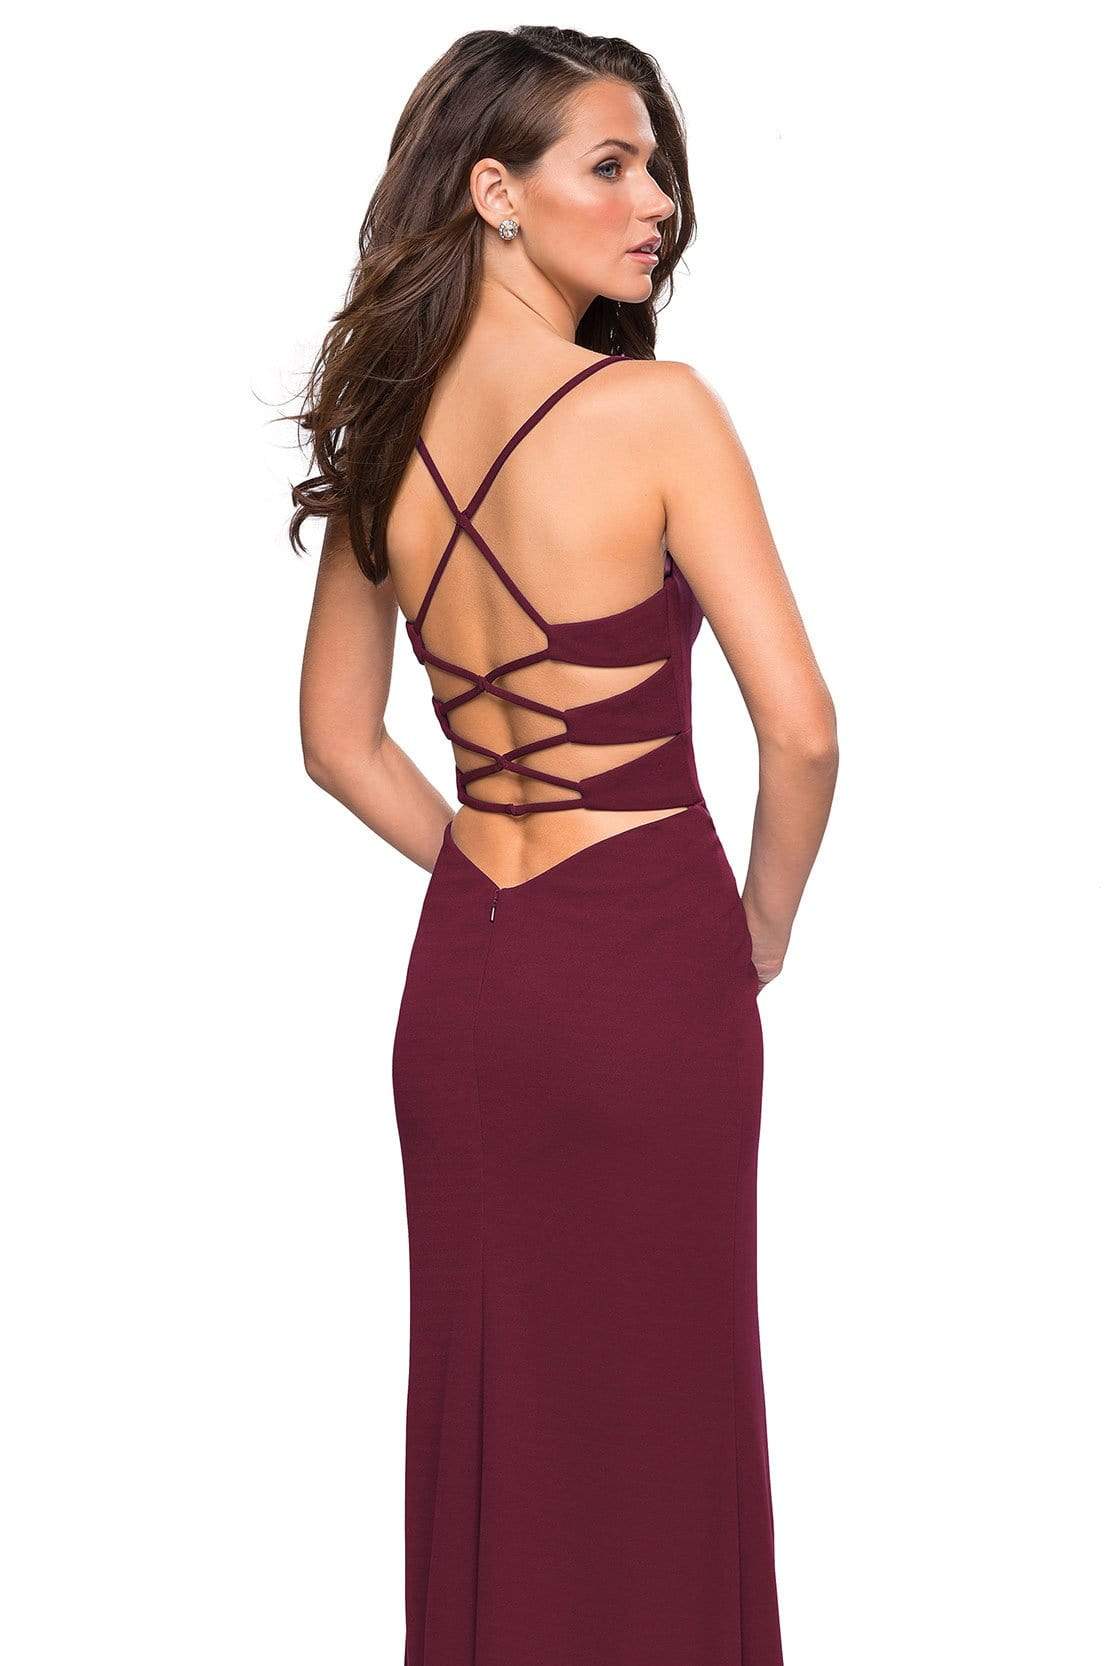 La Femme - 26940 Crisscrossed Lace Up Back High Slit Gown Special Occasion Dress